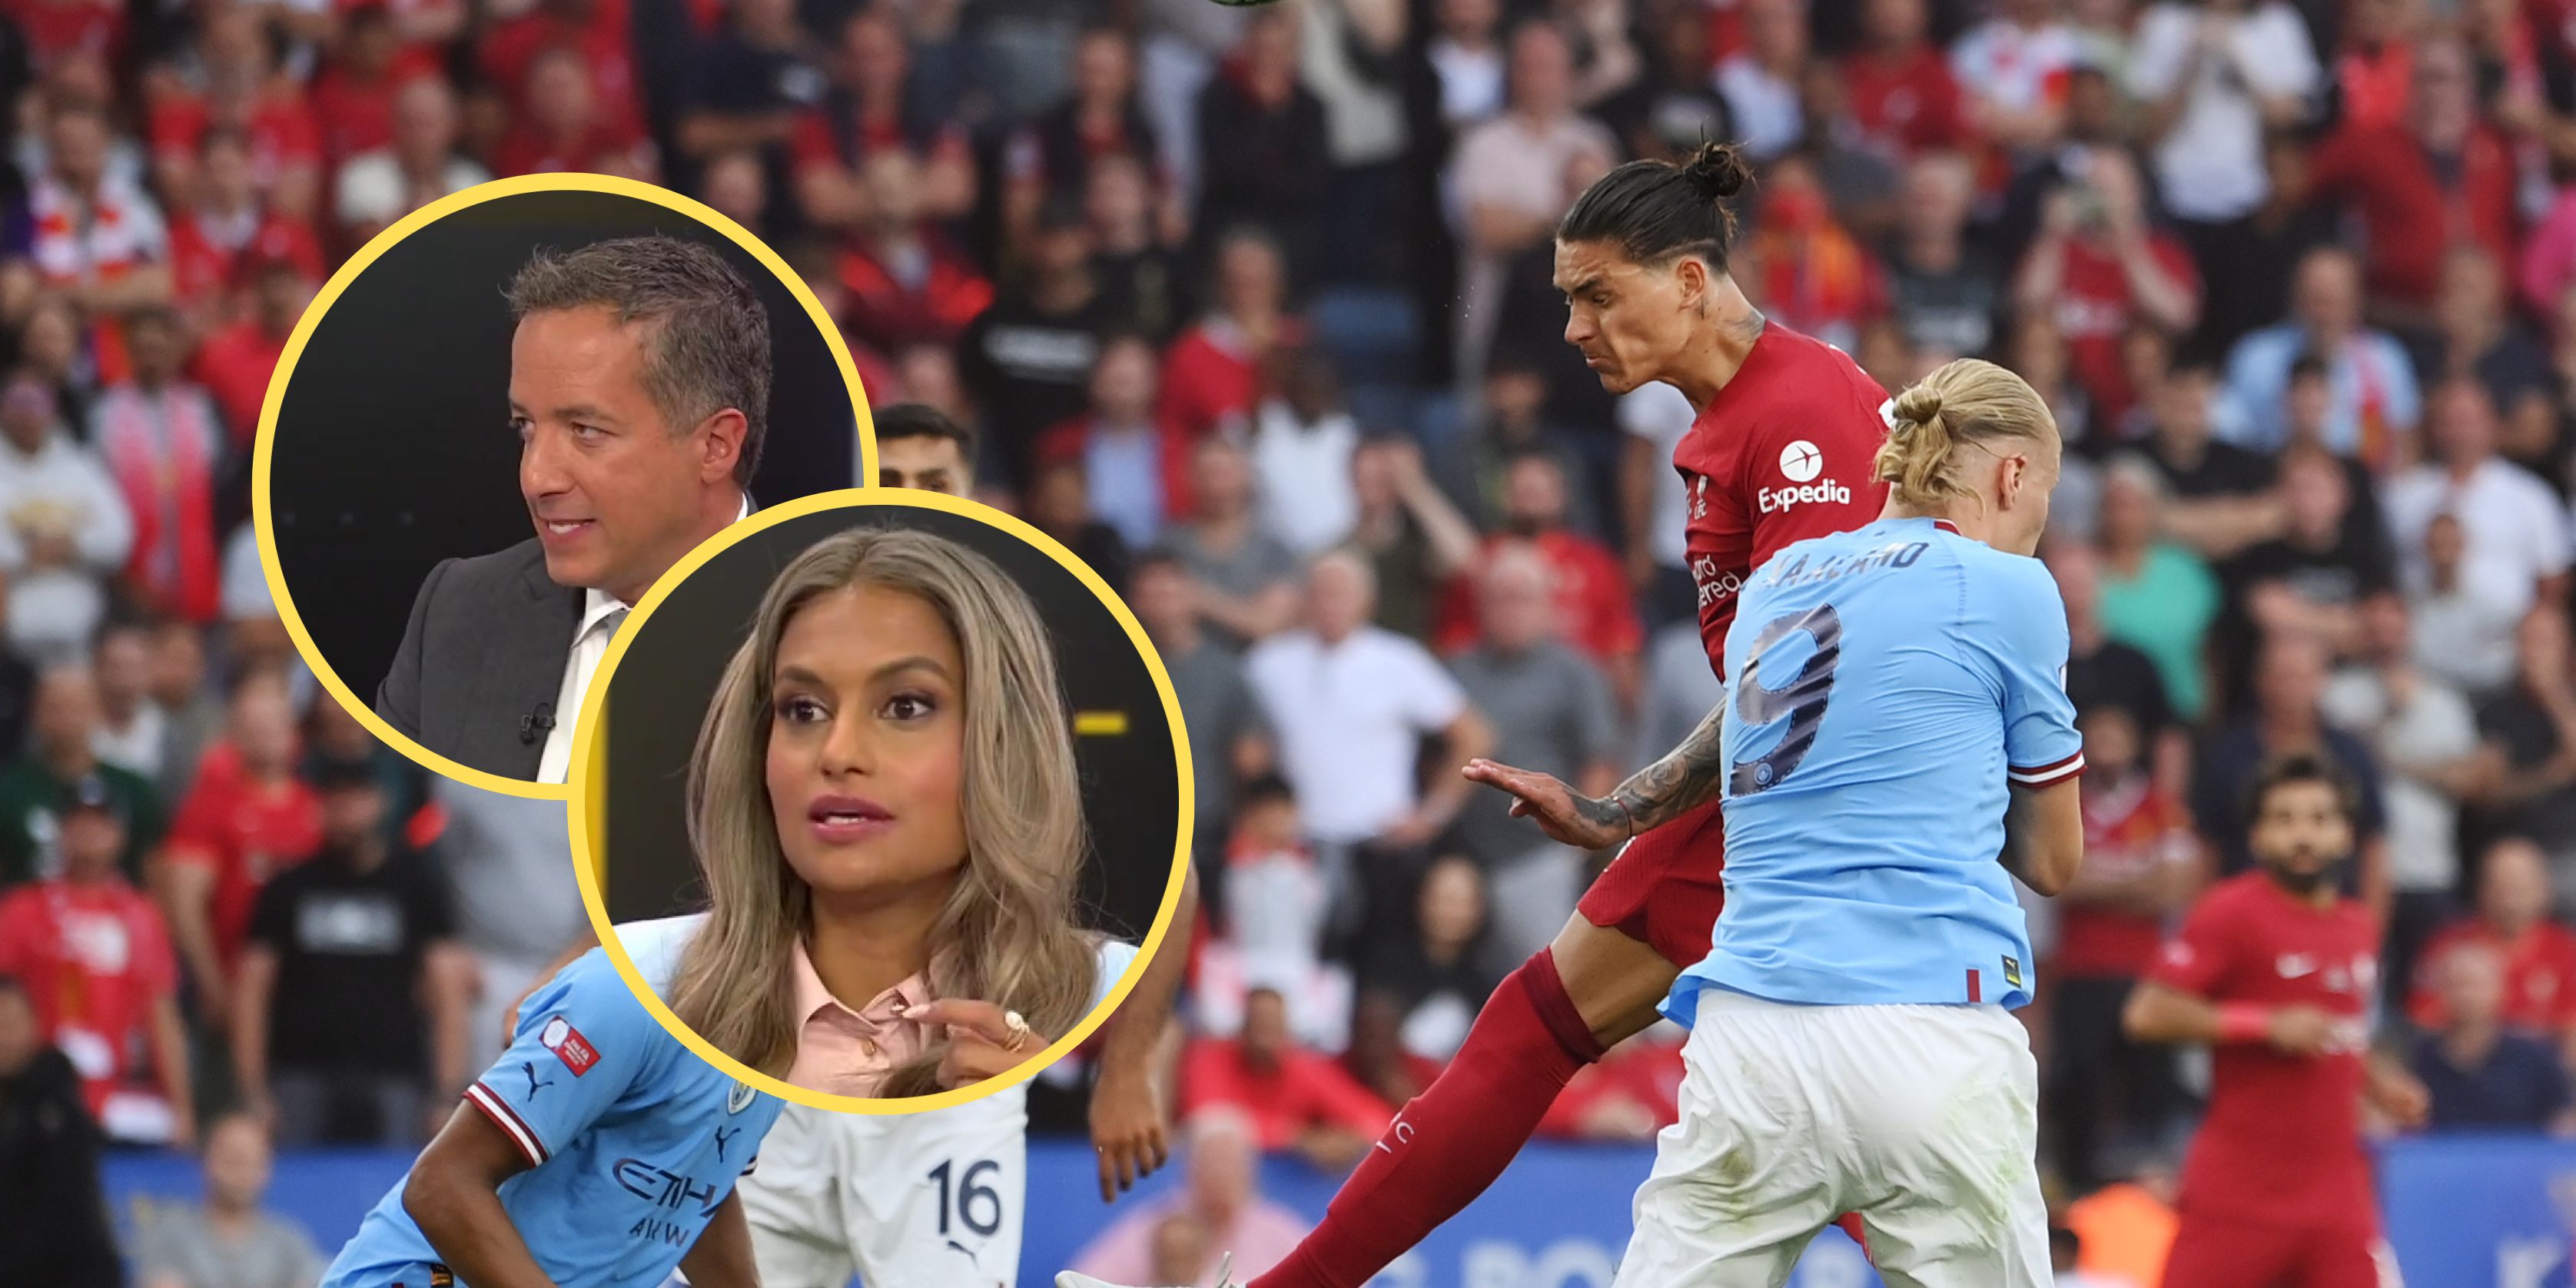 (Video) Two Sky Sports journalists have had their say on Haaland v Nunez – did LFC or City get the better deal?